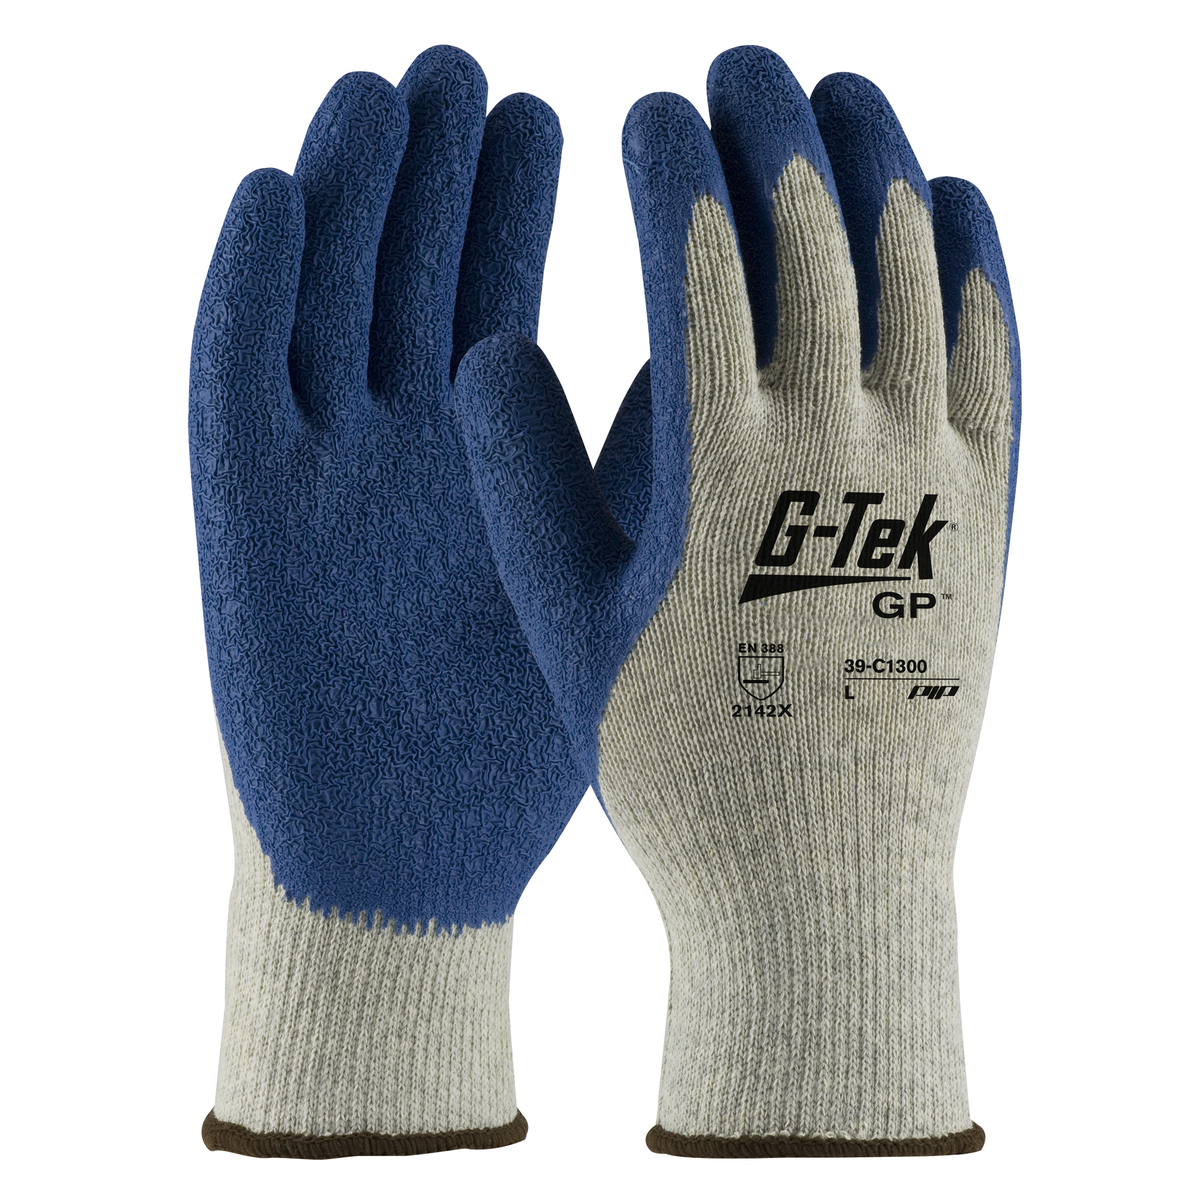 PIP® X-Large G-Tek® GP™ 10 Gauge Blue Nitrile Palm And Finger Coated Work Gloves With Polyester Liner And Continuous Knit Wrist